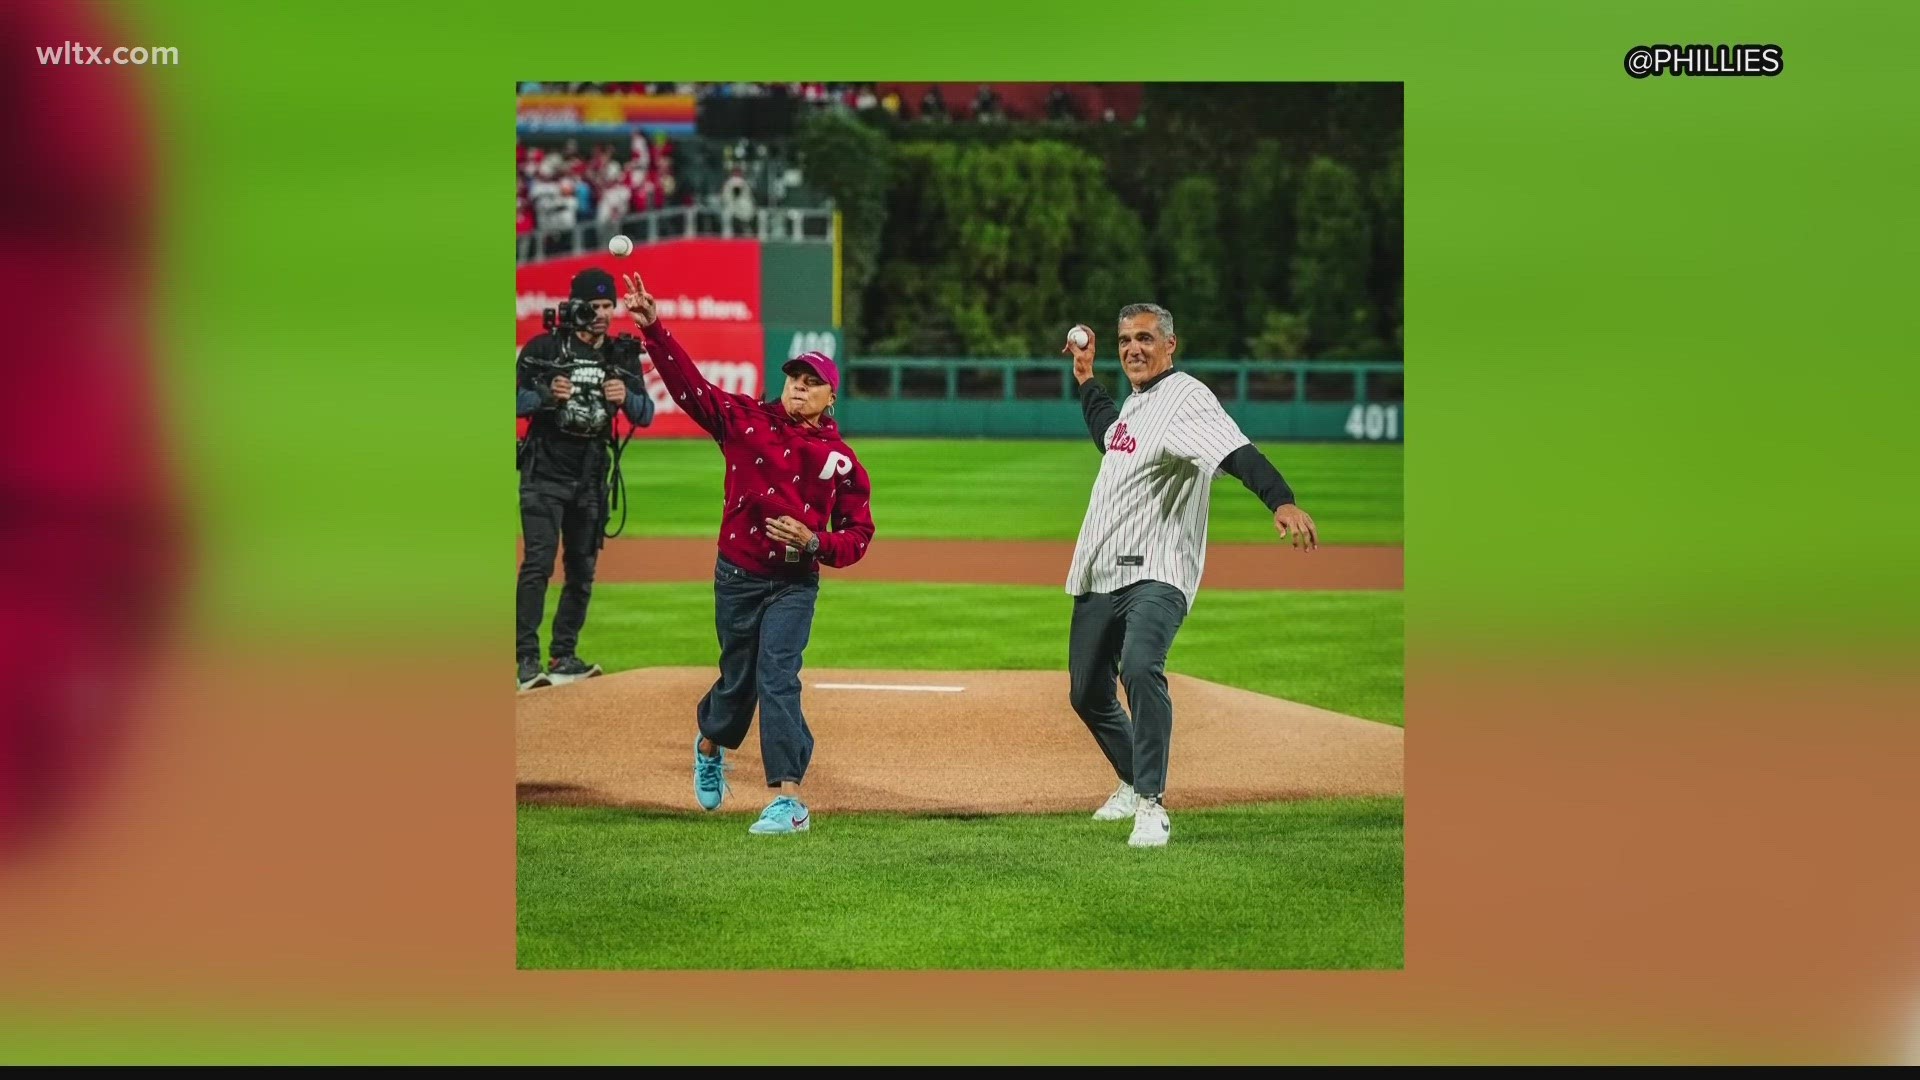 Why is South Carolina's Dawn Staley throwing first pitch for Phillies?